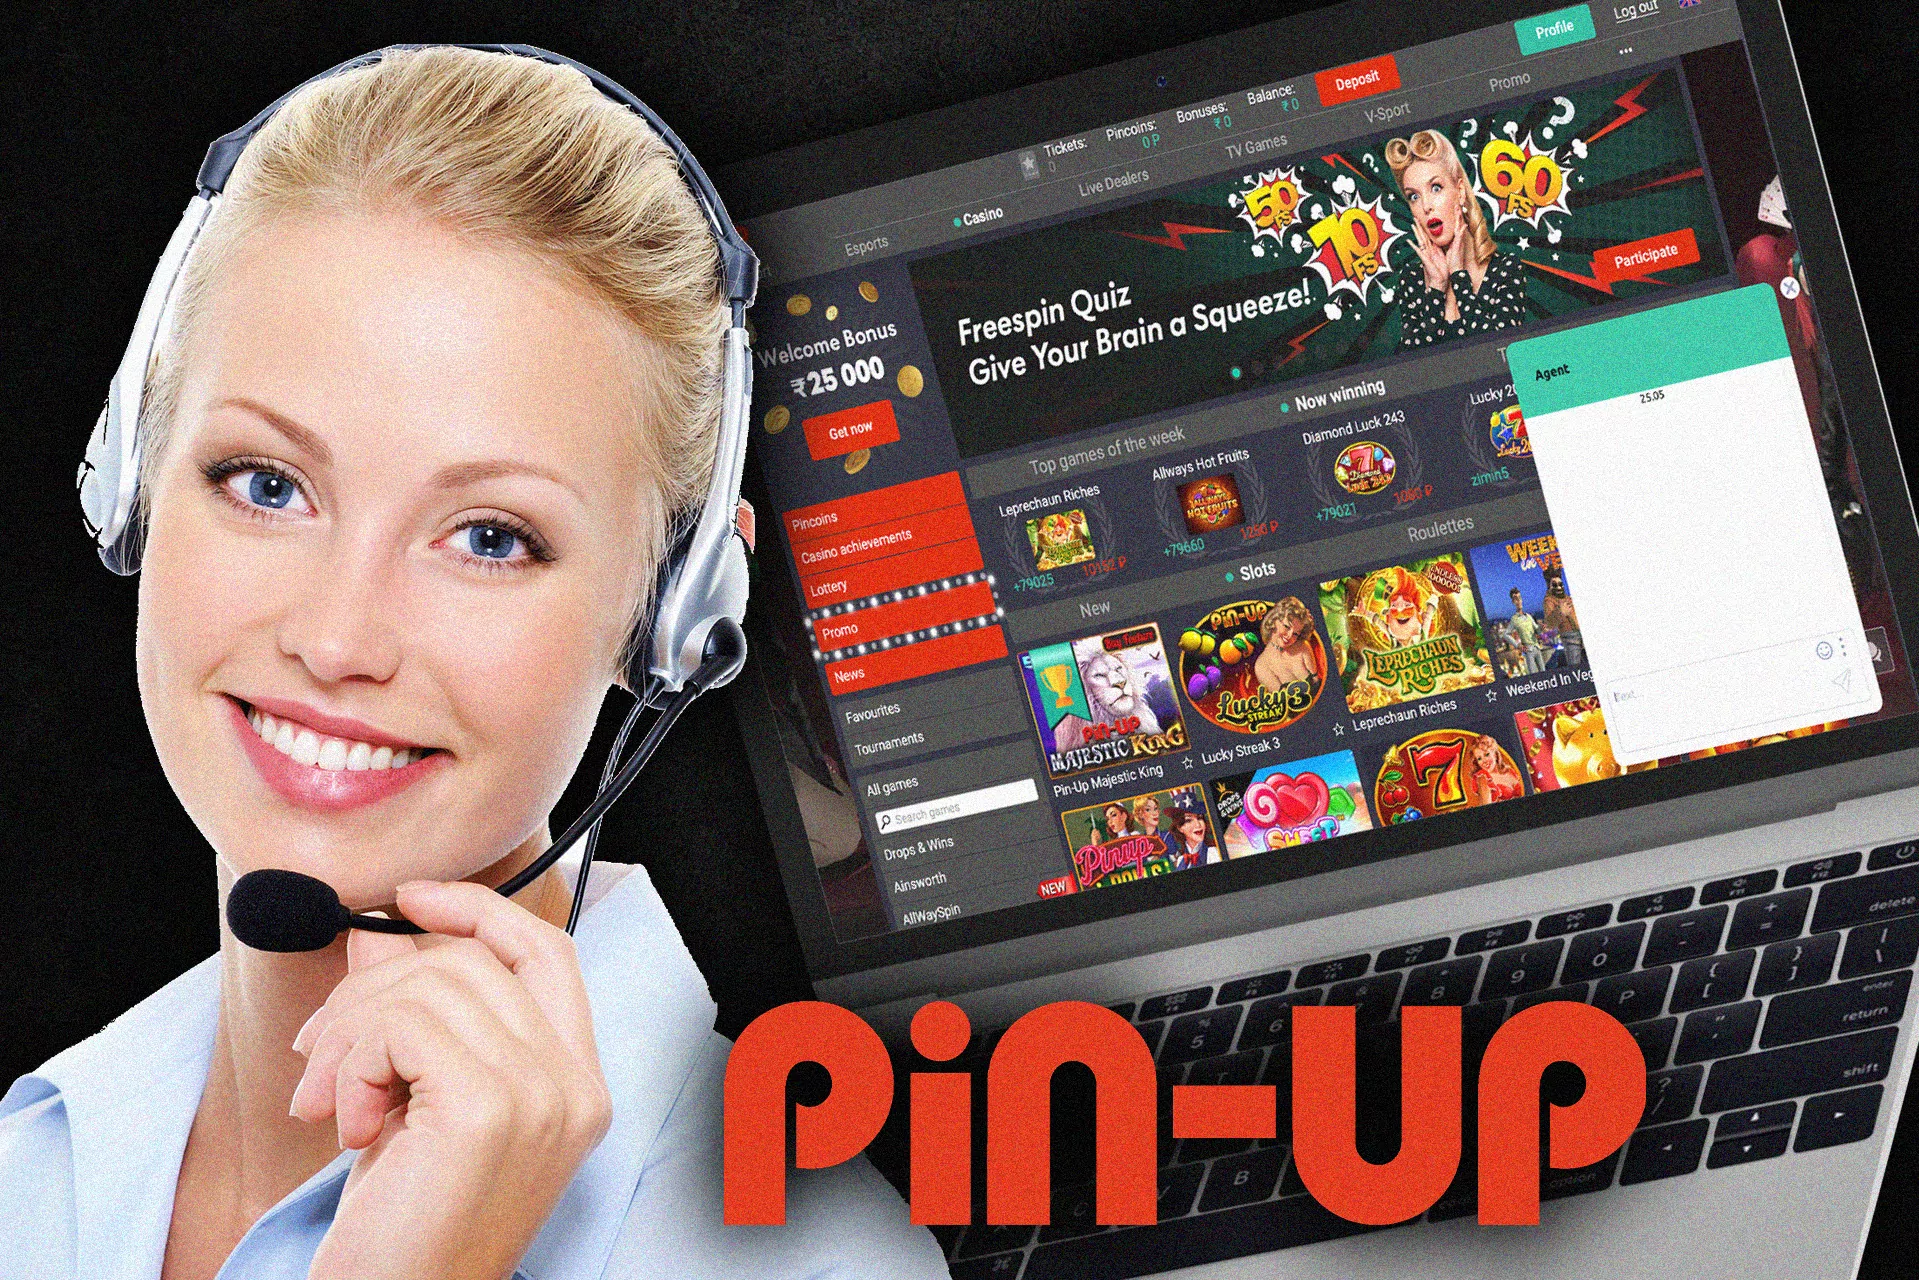 Pin-Up has a friendly and fast support service.